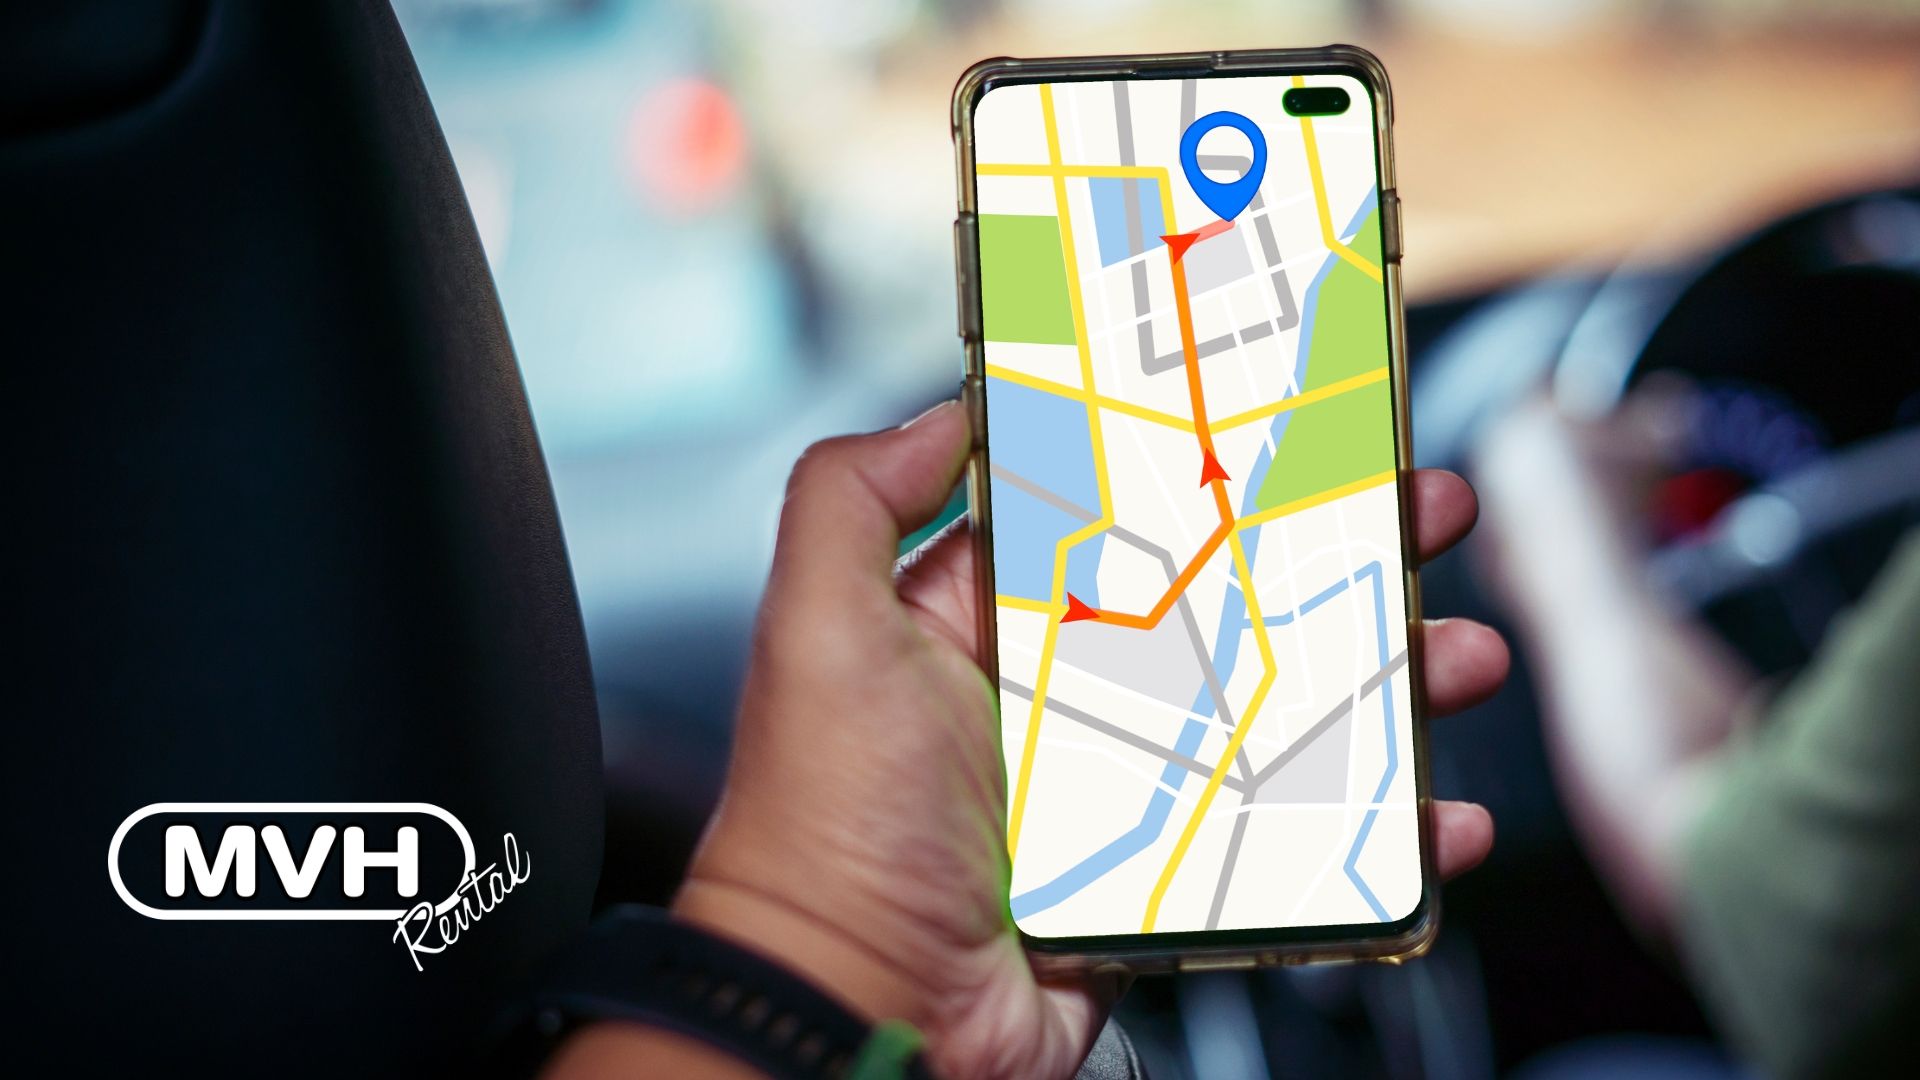 Planning a road trip in a hire car? Discover how to enhance your rental experience with 8 apps that 